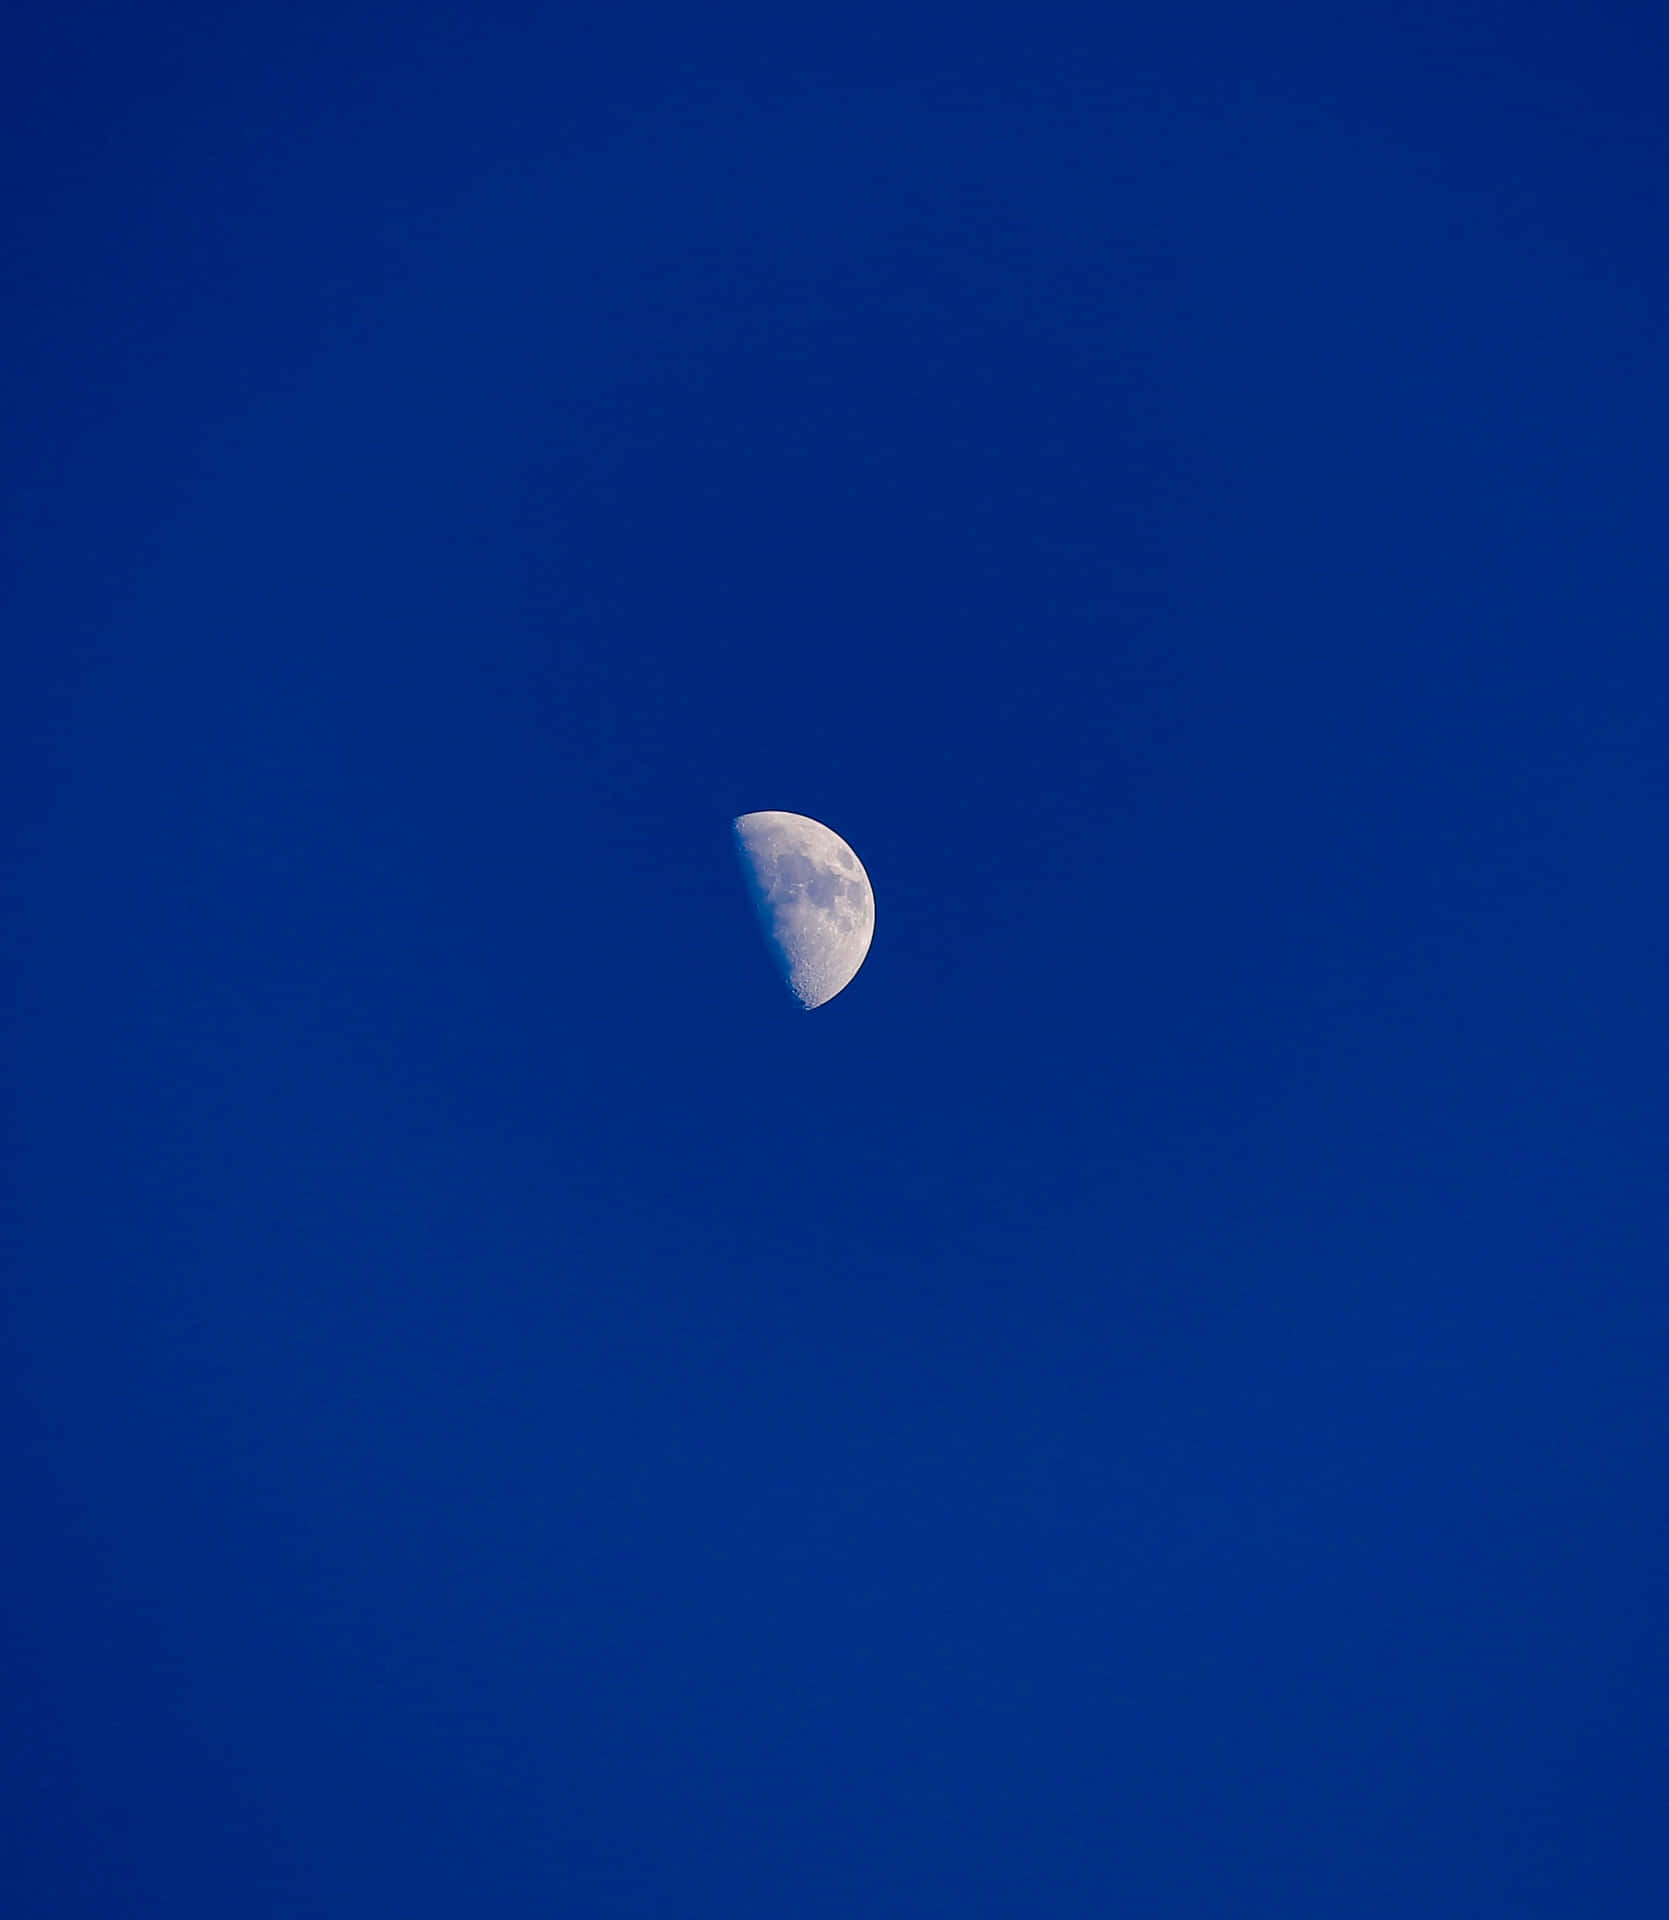 A View of a Stunning Half Moon